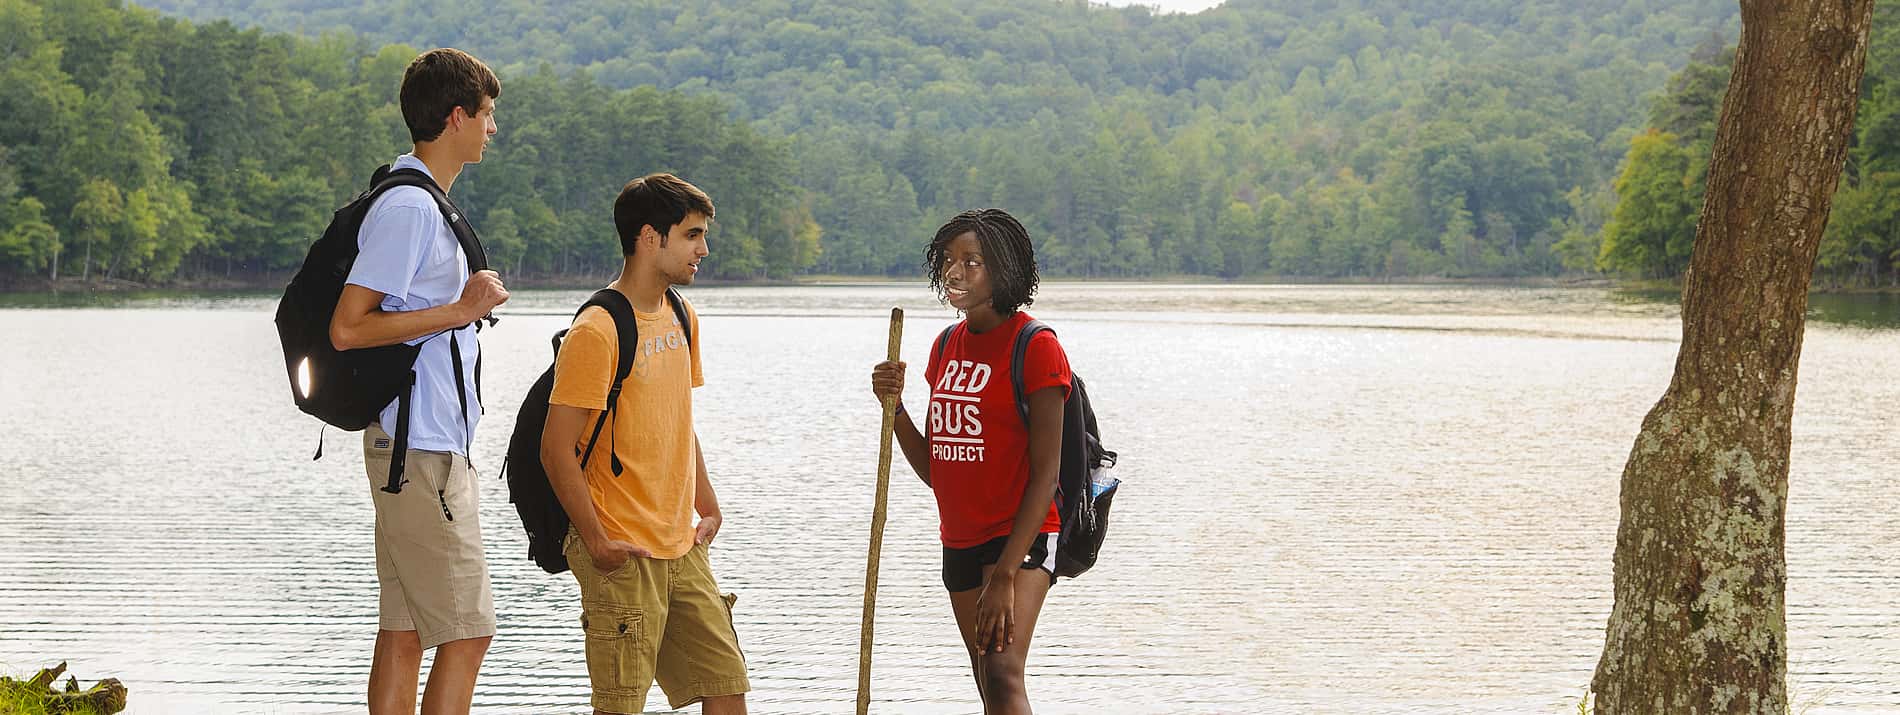 Three students with backpacks and walking sticks standing by a lake